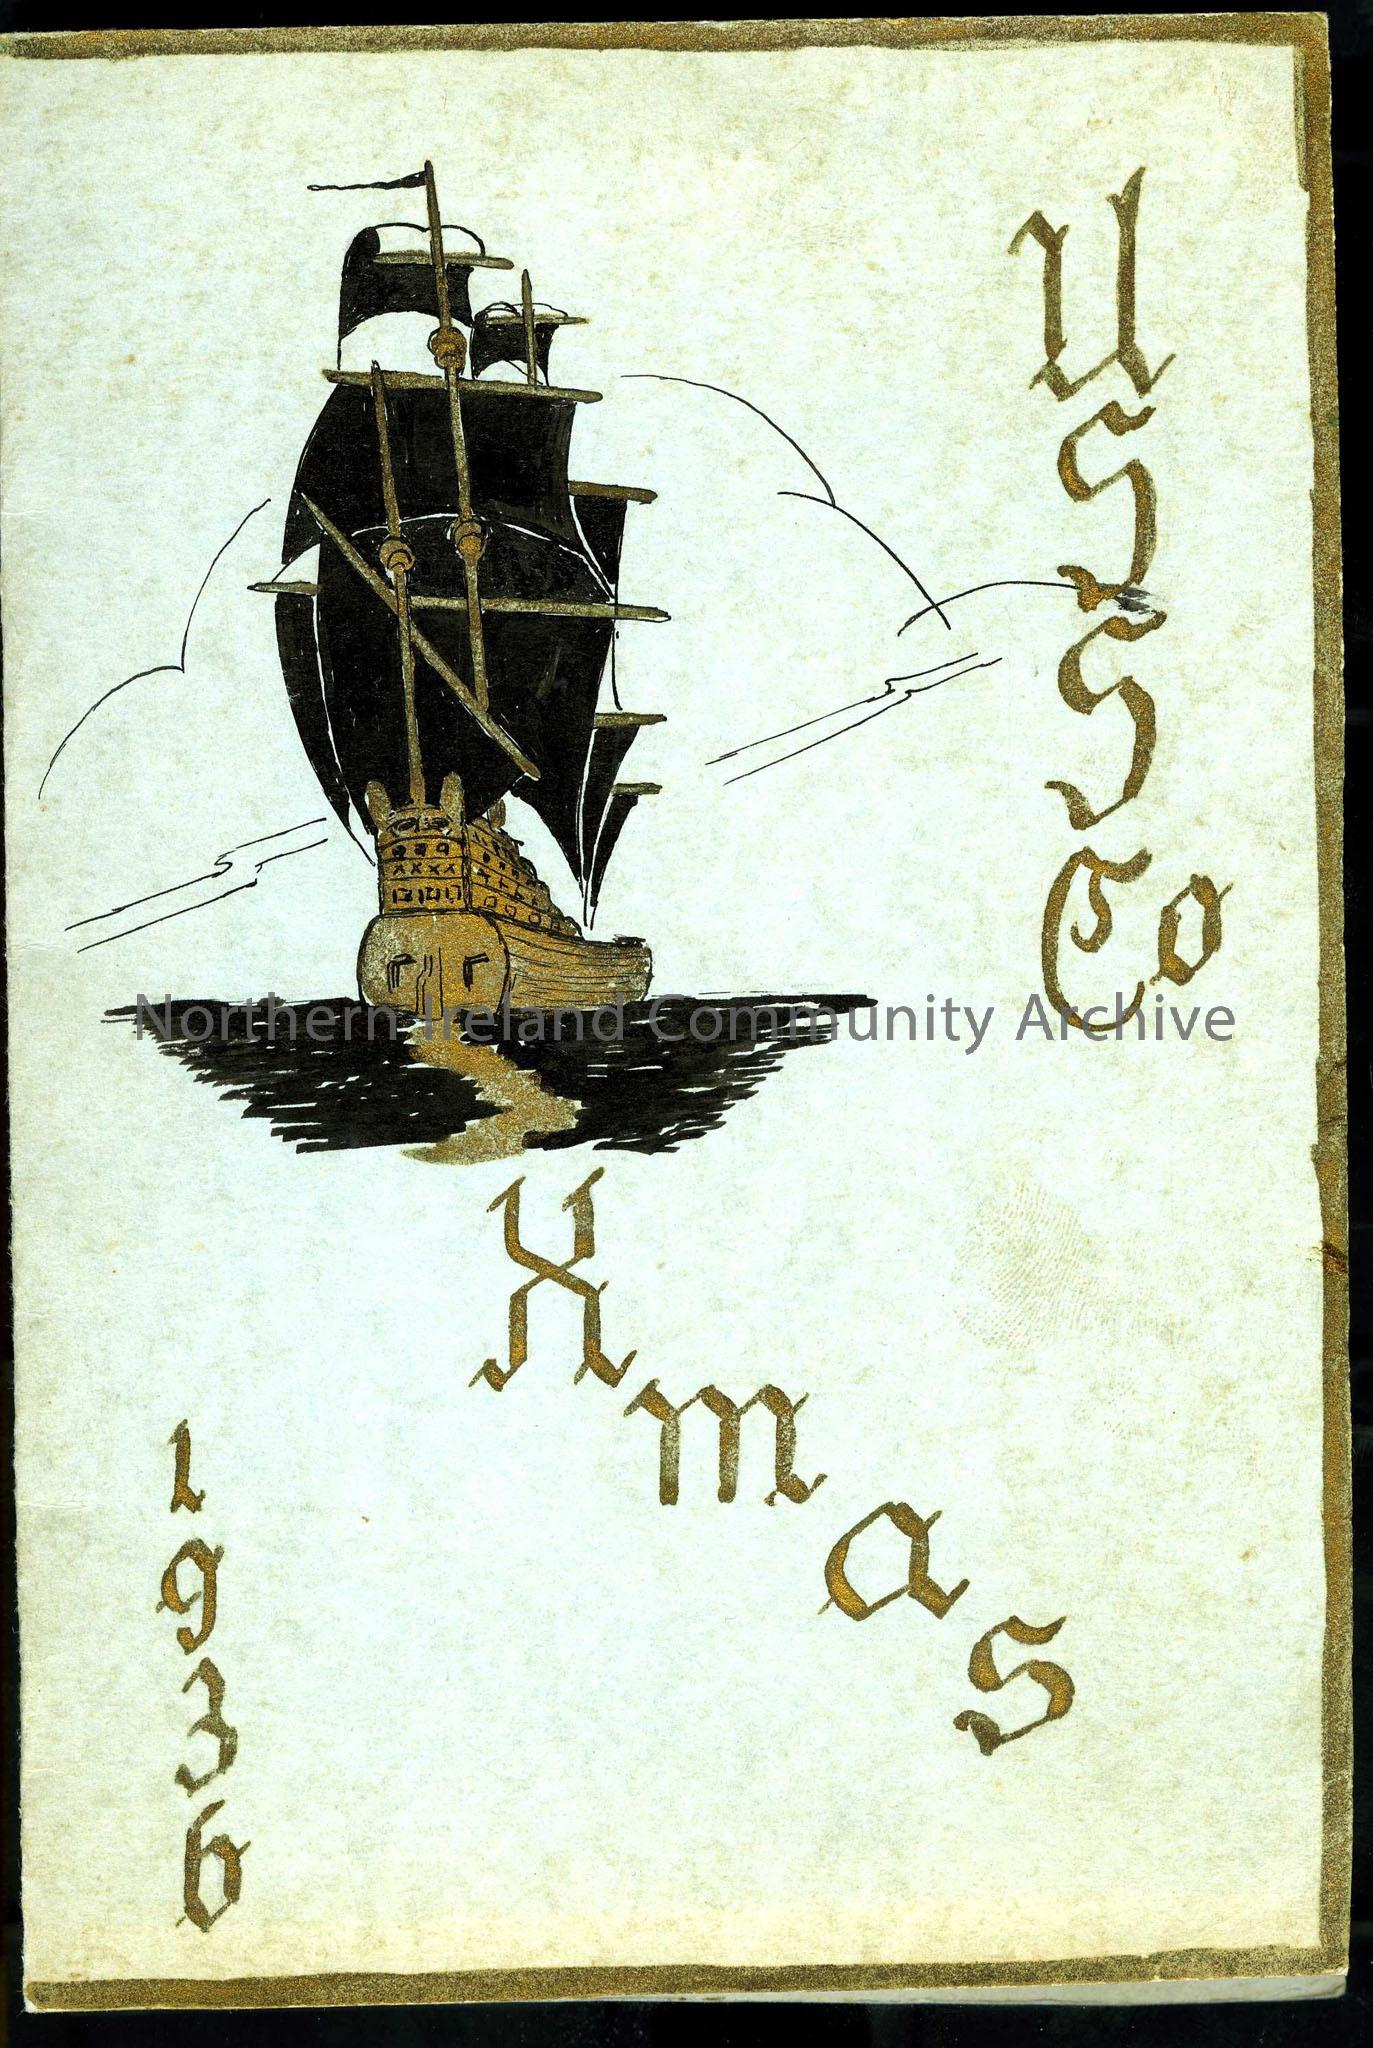 S.S Dunmore Head Xmas 1936 menu, with the Compliments of the Head Line,  dark ink drawing of ship on front cover.